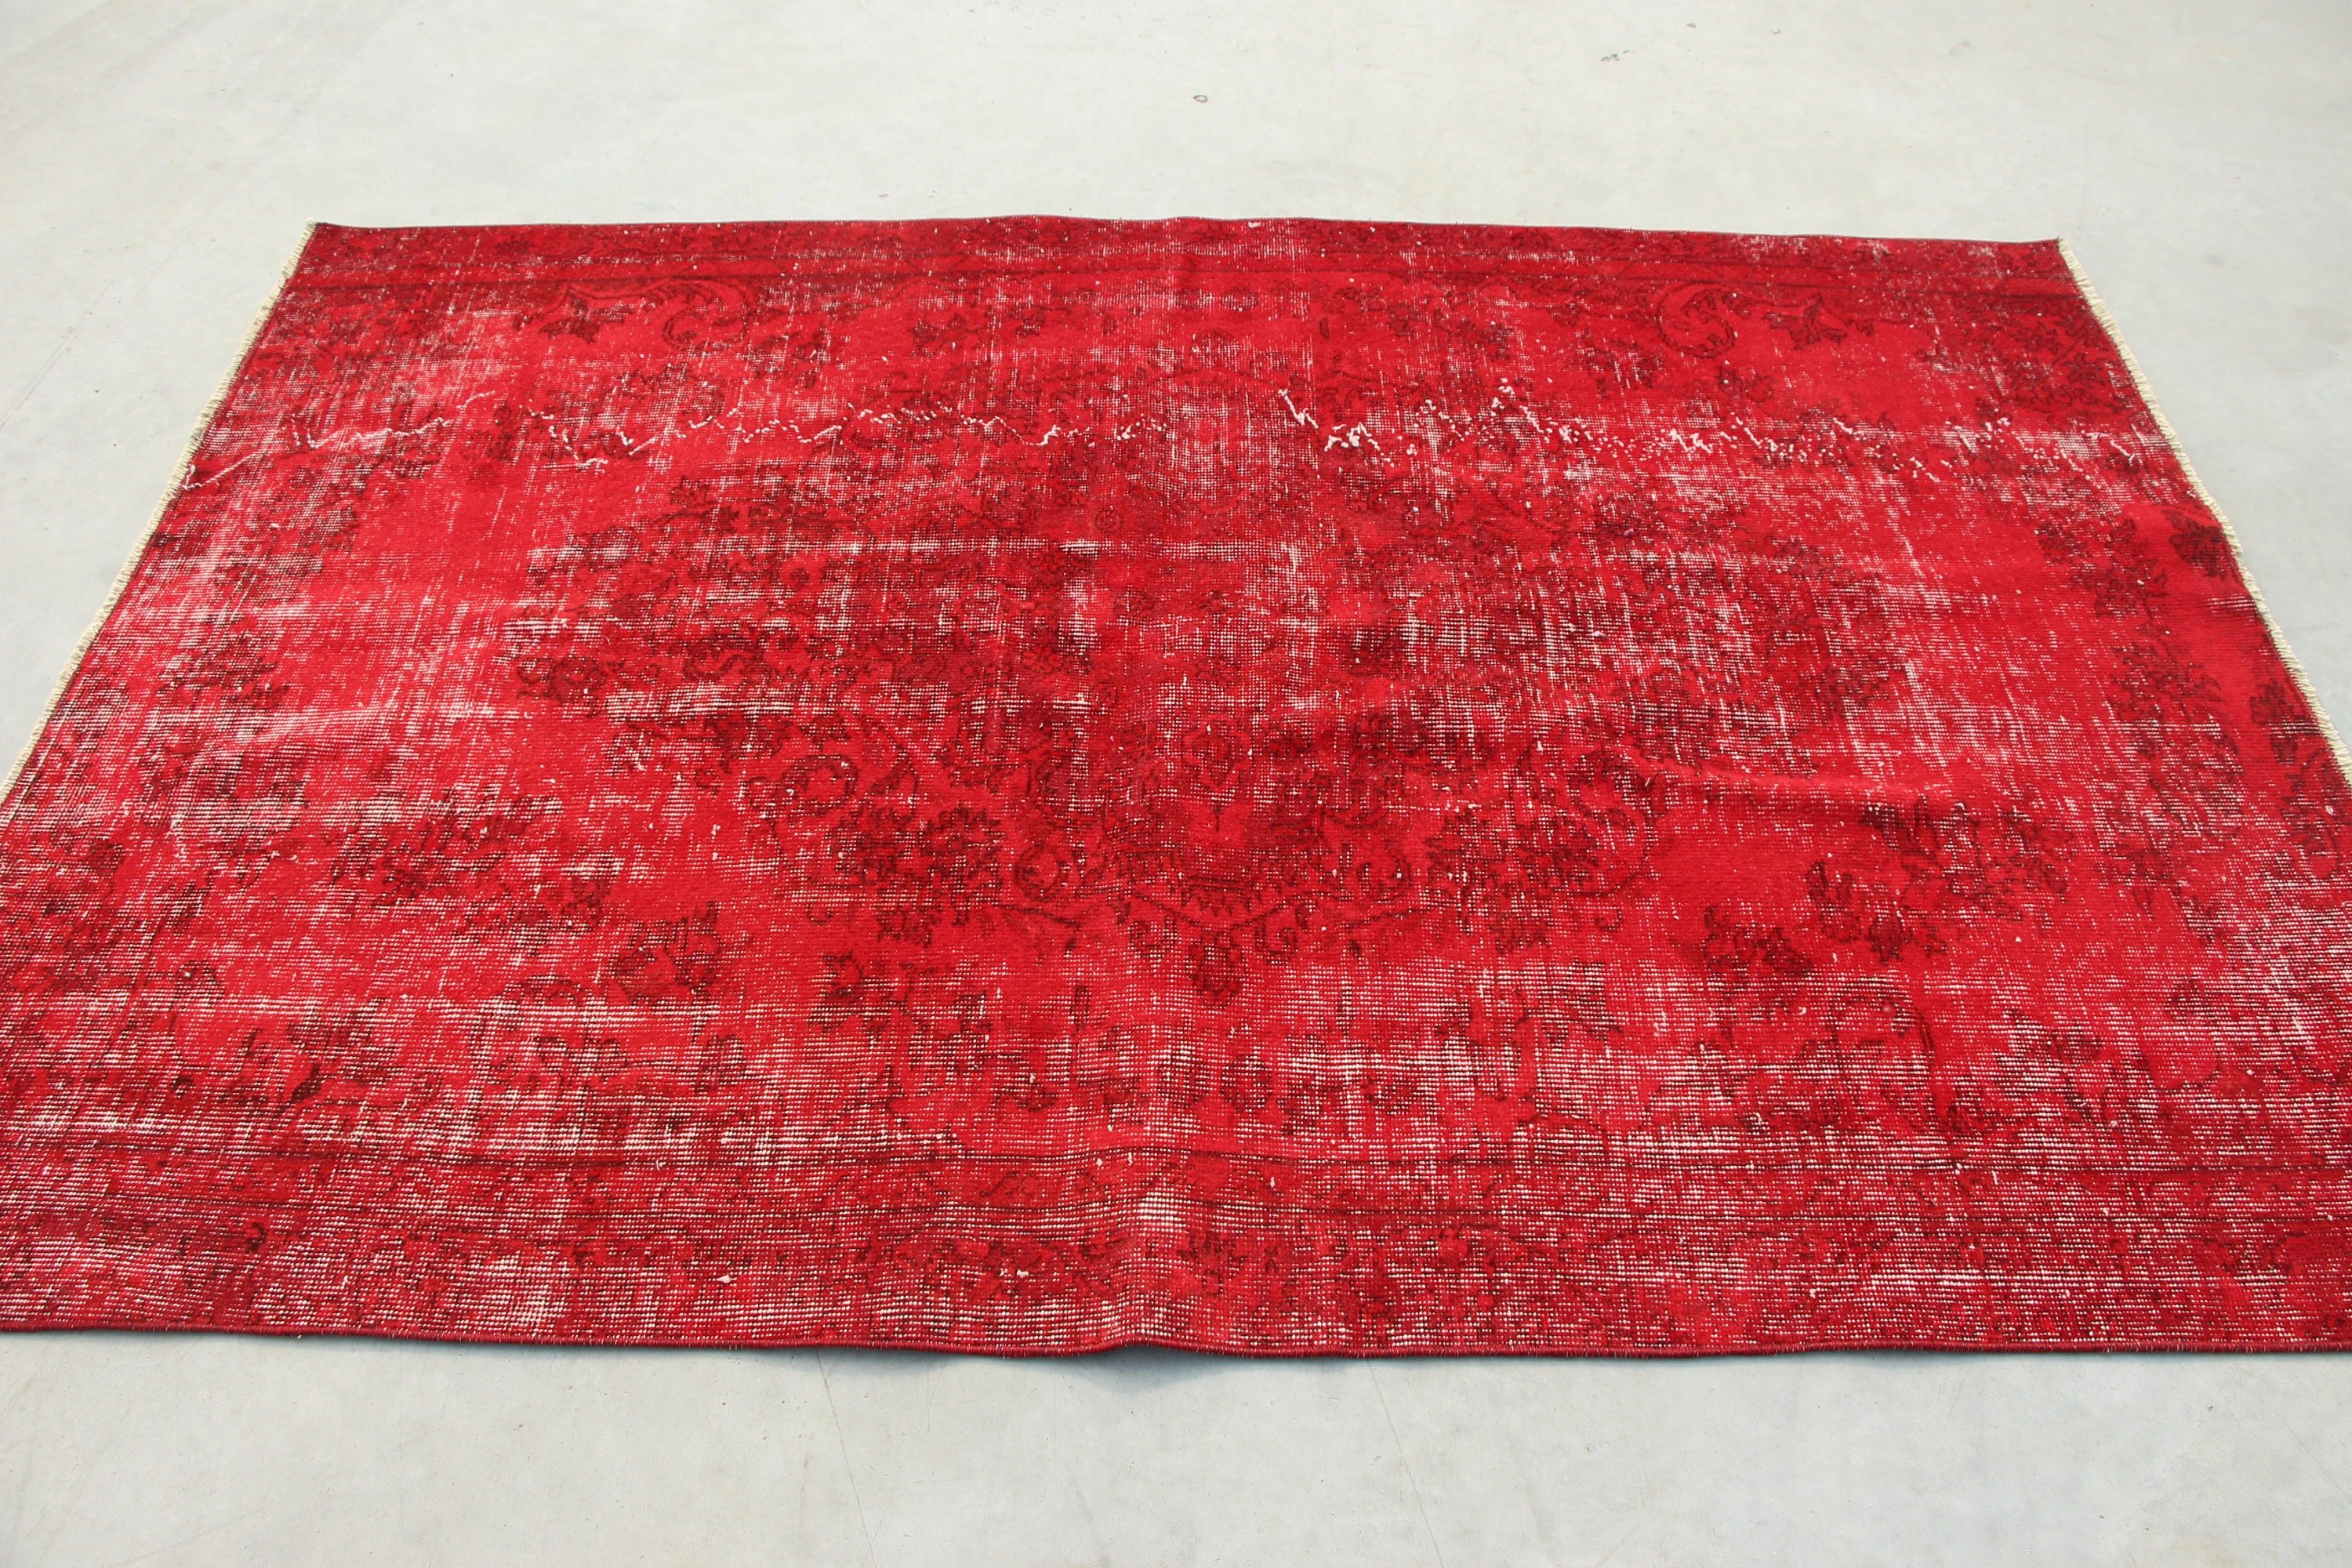 Vintage Decor Rugs, Bedroom Rug, Antique Rug, Rugs for Area, Home Decor Rugs, Turkish Rug, 4.7x7 ft Area Rugs, Vintage Rug, Red Antique Rug